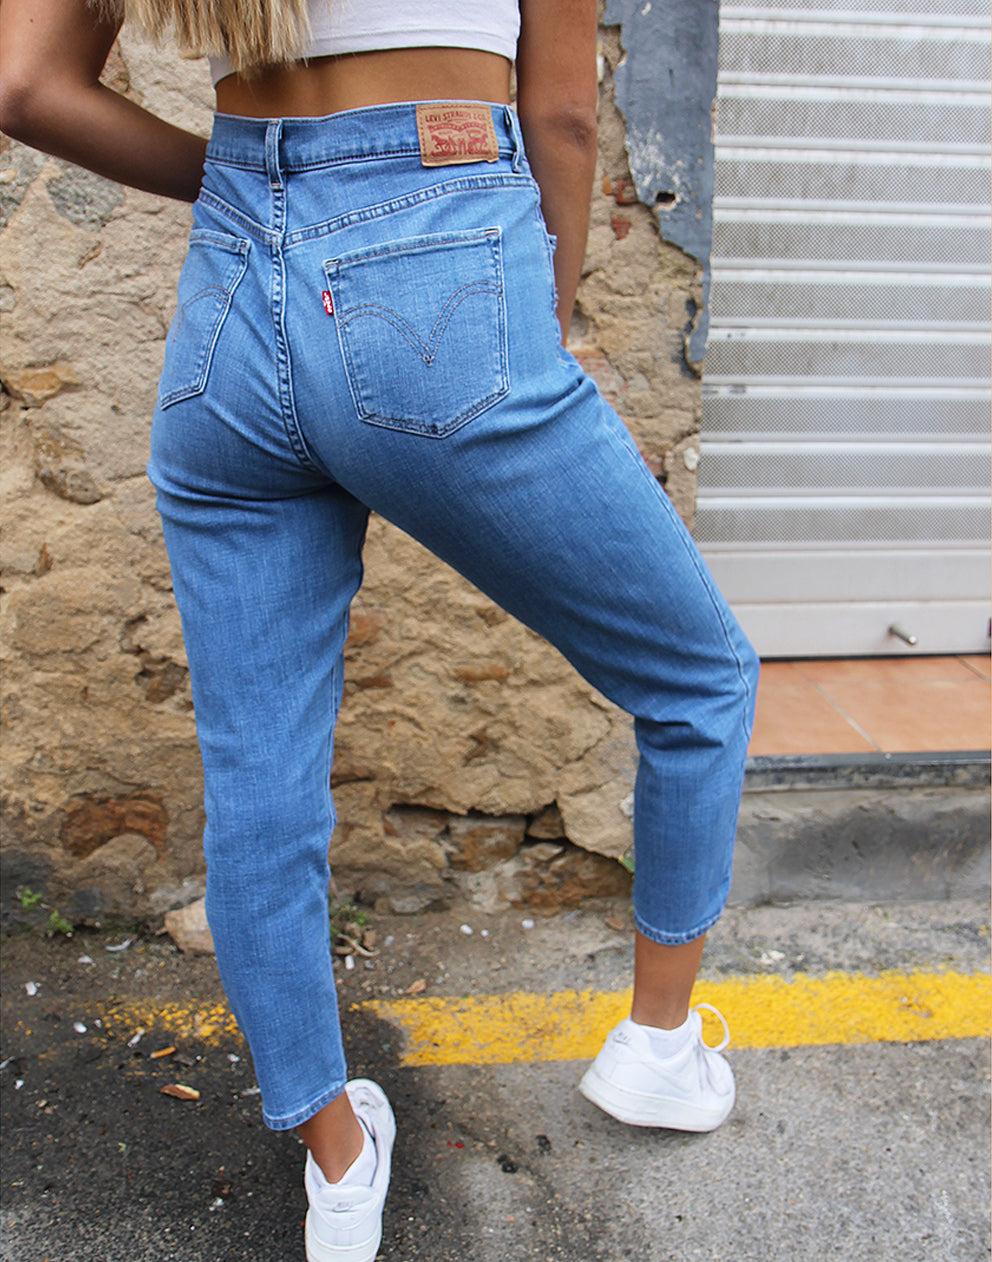 520 Levi's jeans in blue